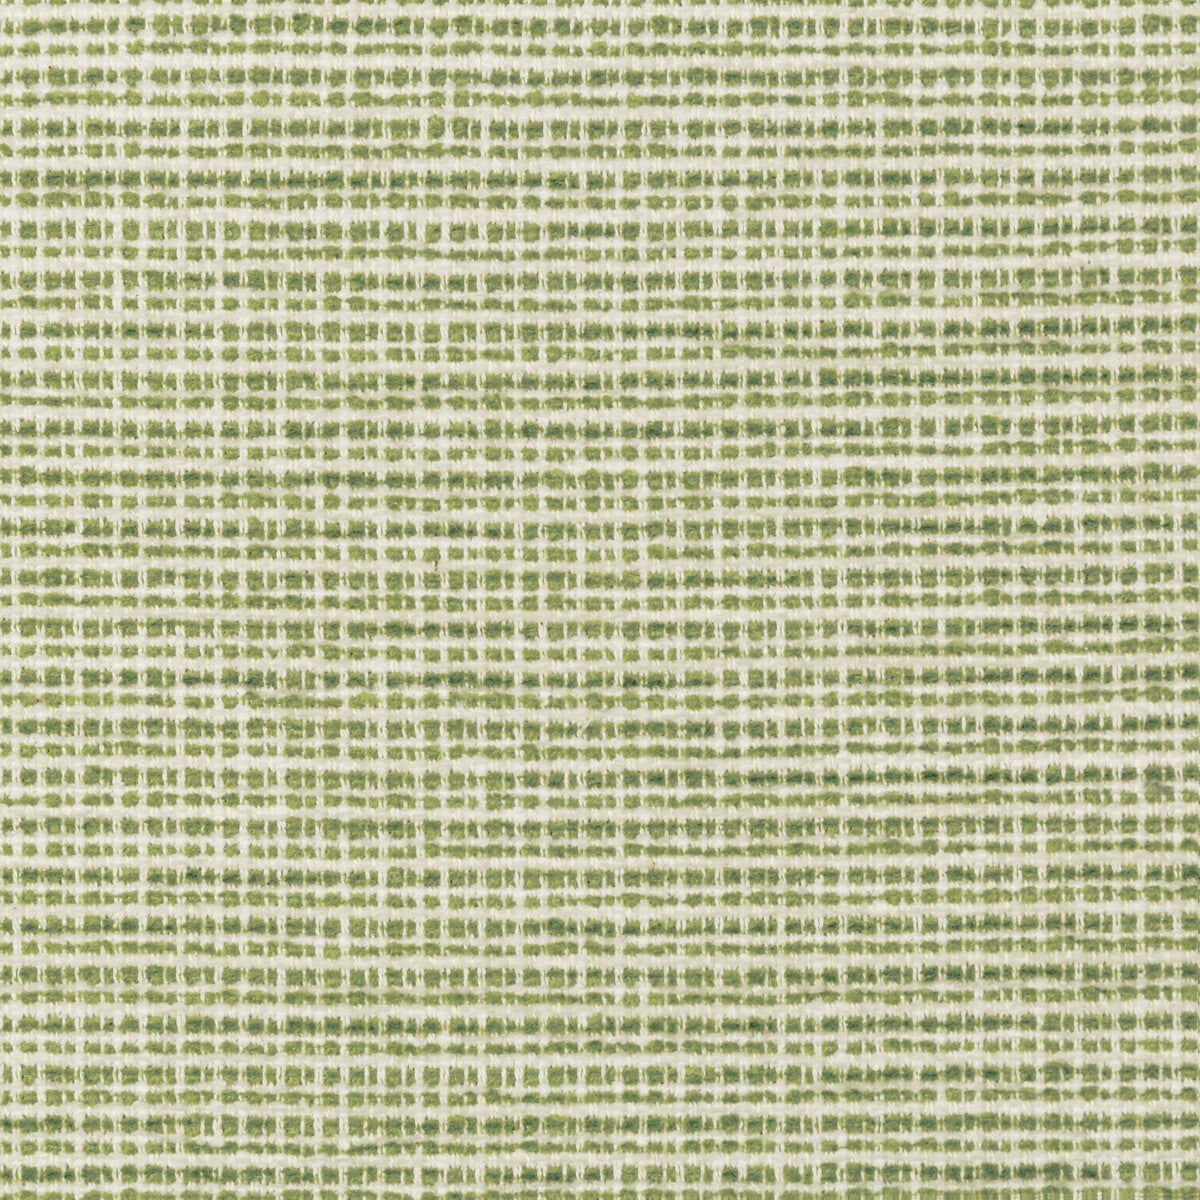 Freney Texture fabric in green color - pattern 8019149.3.0 - by Brunschwig &amp; Fils in the Chambery Textures II collection